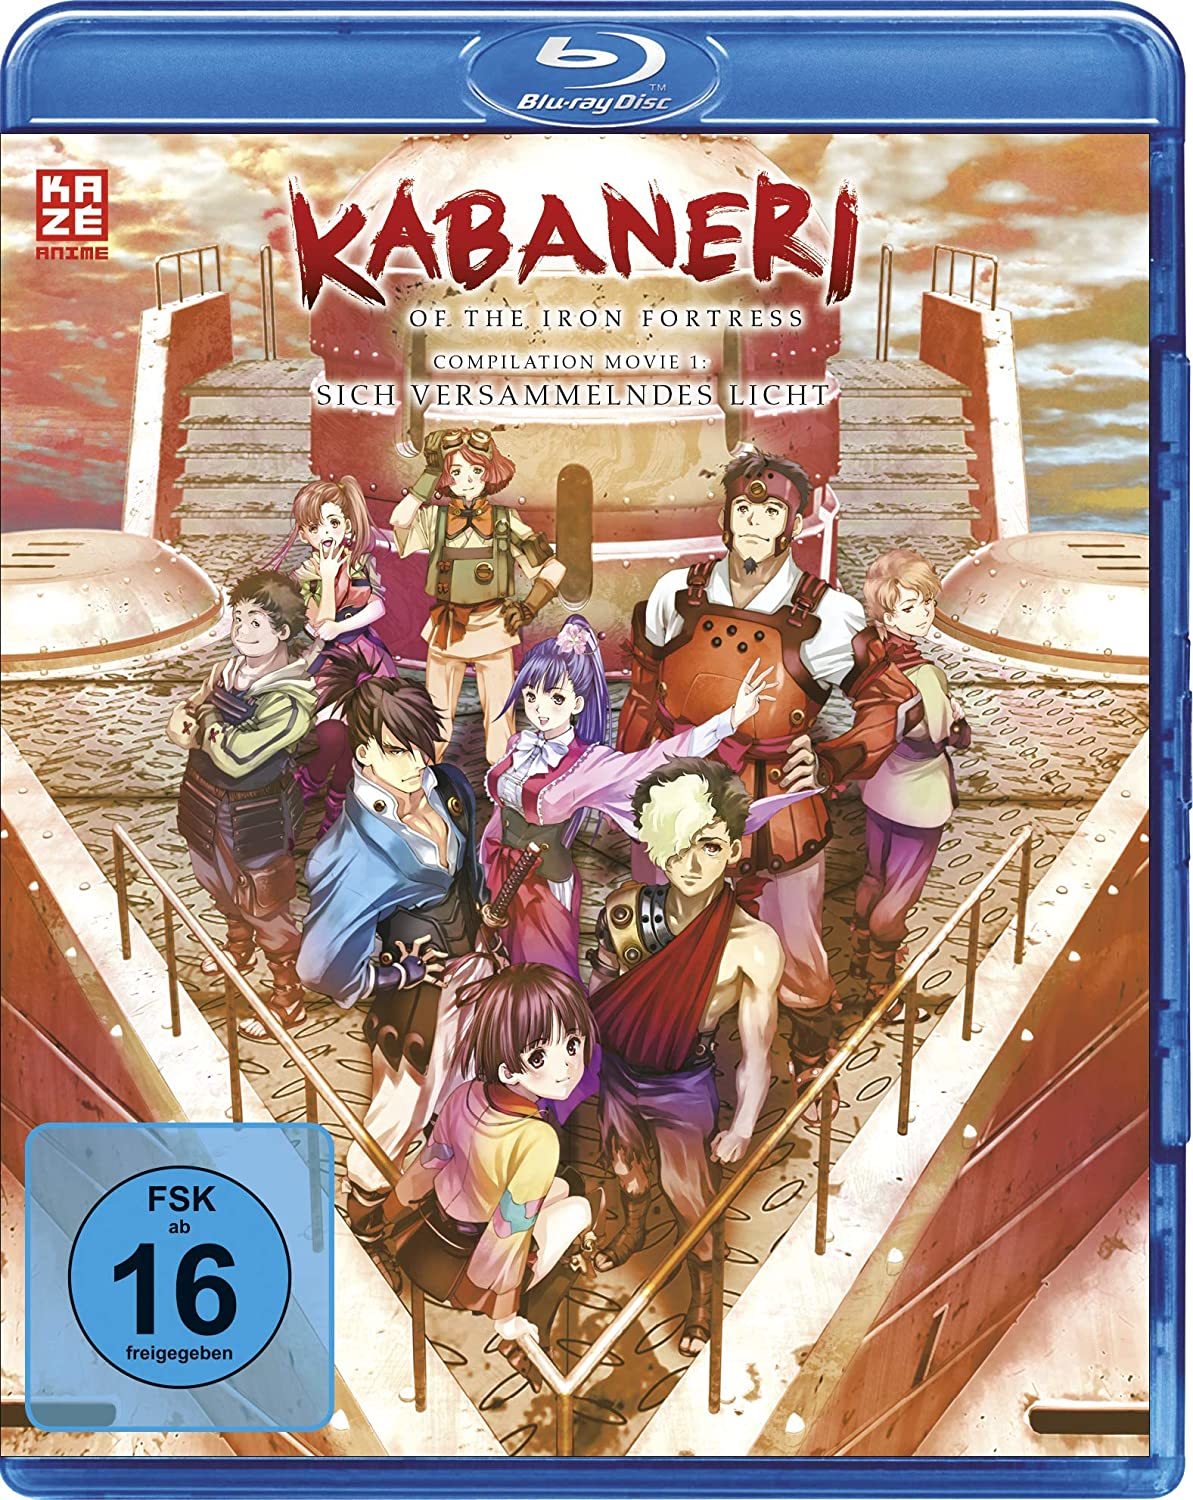 Buy Kabaneri of the Iron Fortress DVD: Complete Edition - $14.99 at